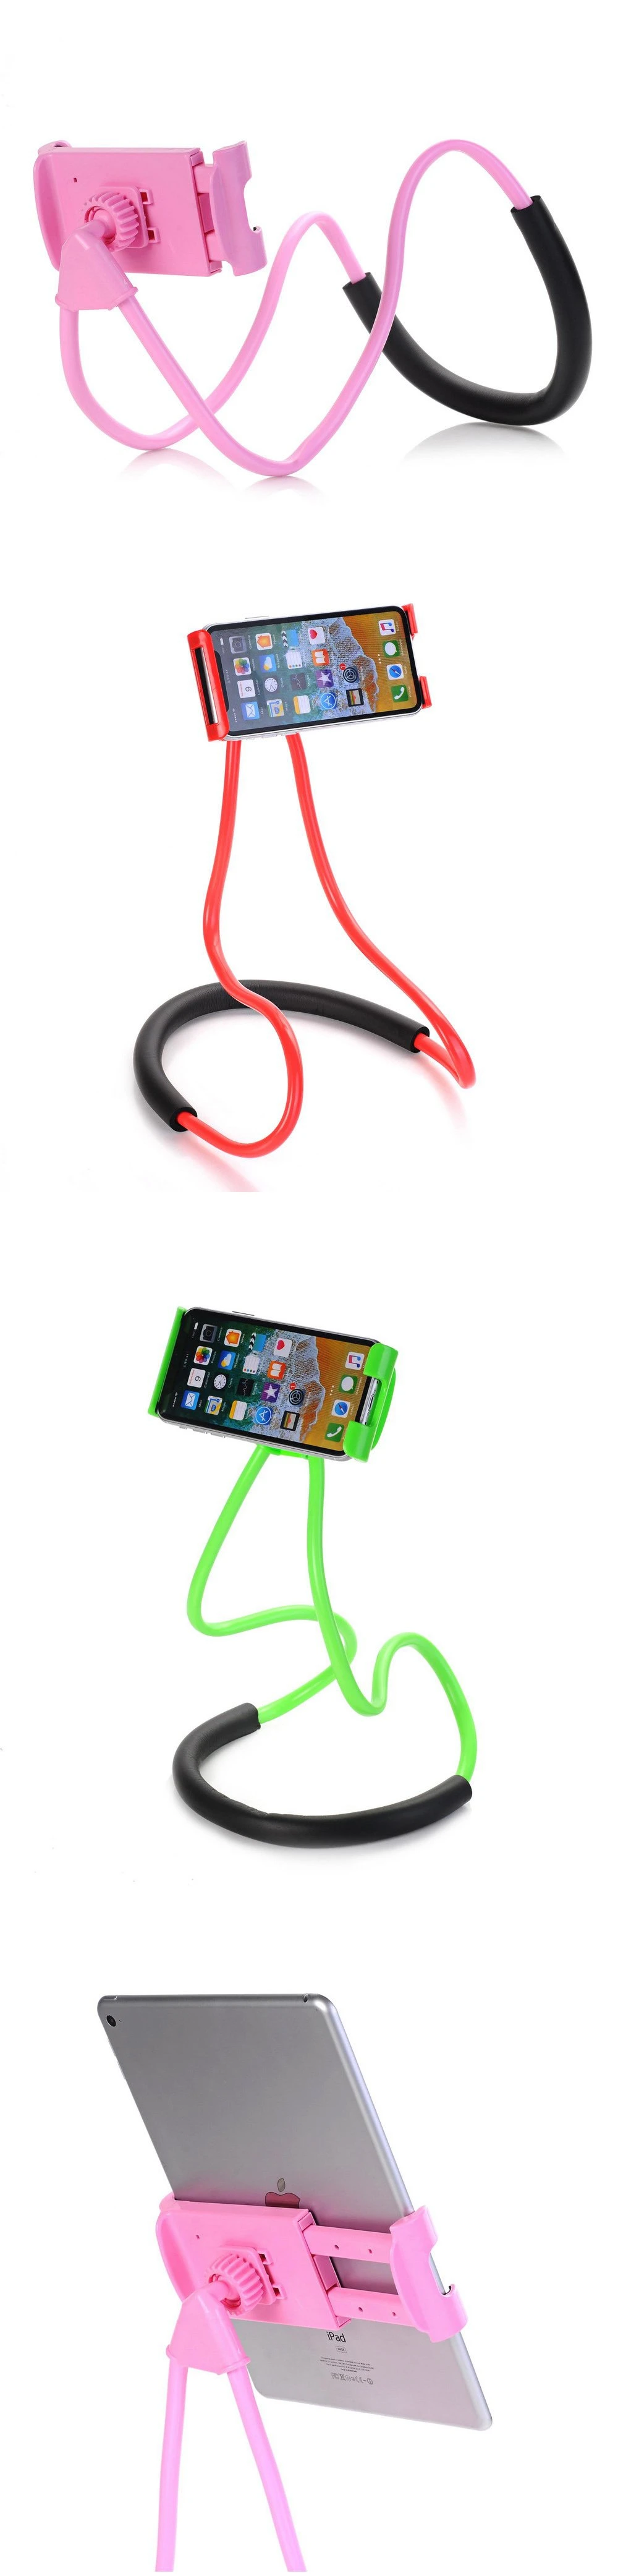 Neck Hanging Flexible Cell Phone Bracket Holder Lazy Stand for Mobile Phone or Tablet